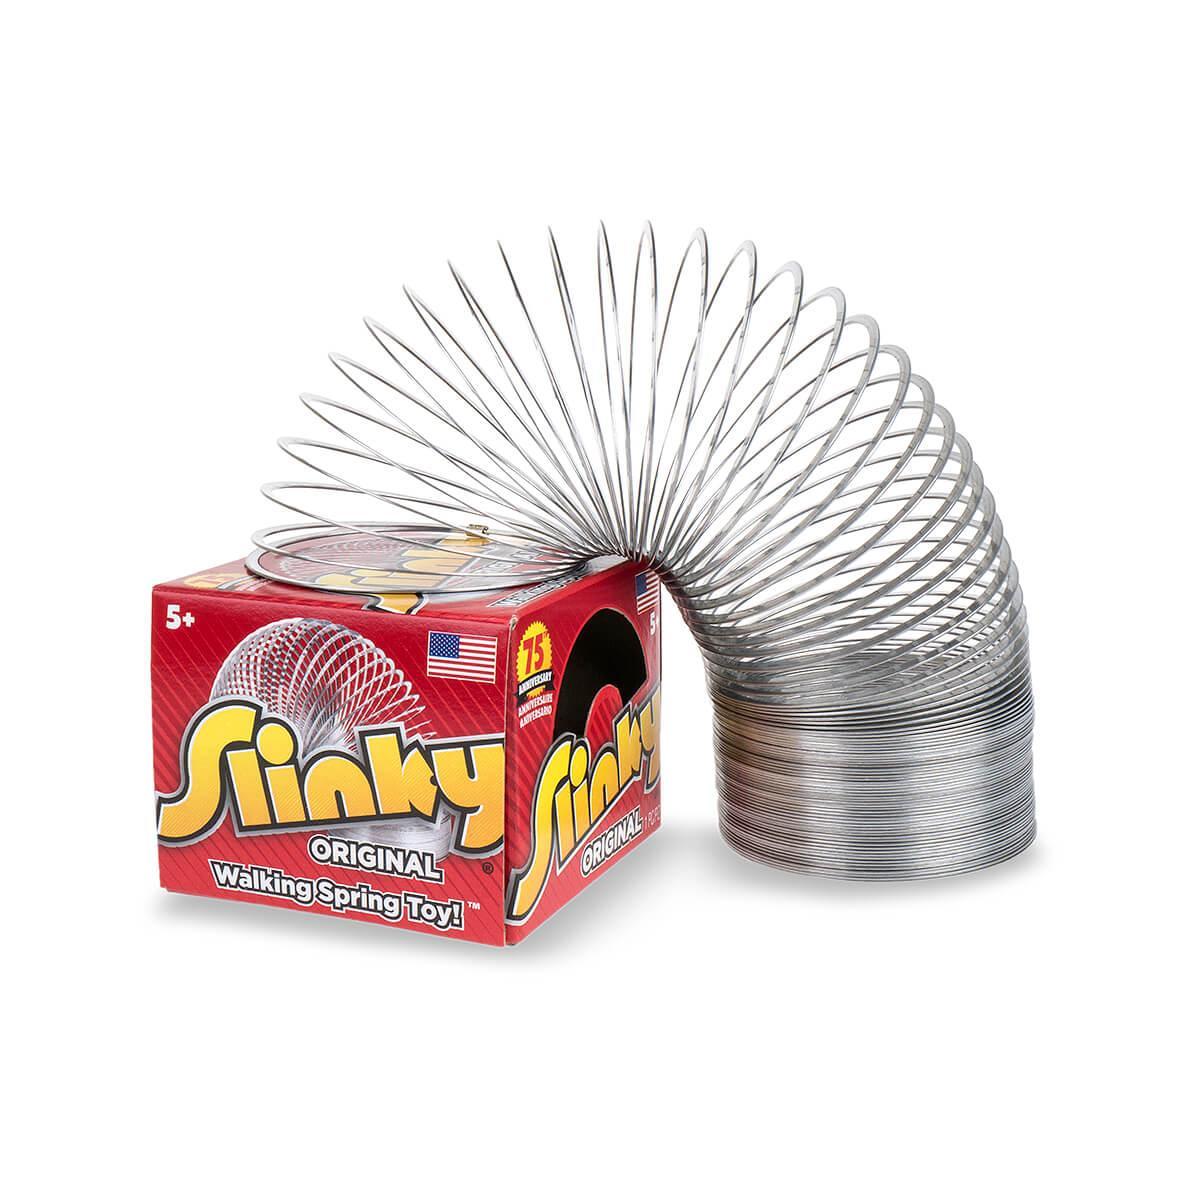 Details about   SLINKY THE ORIGINAL WALKING SPRING TOY SILVER AGES 5 unsealed nib box worn 